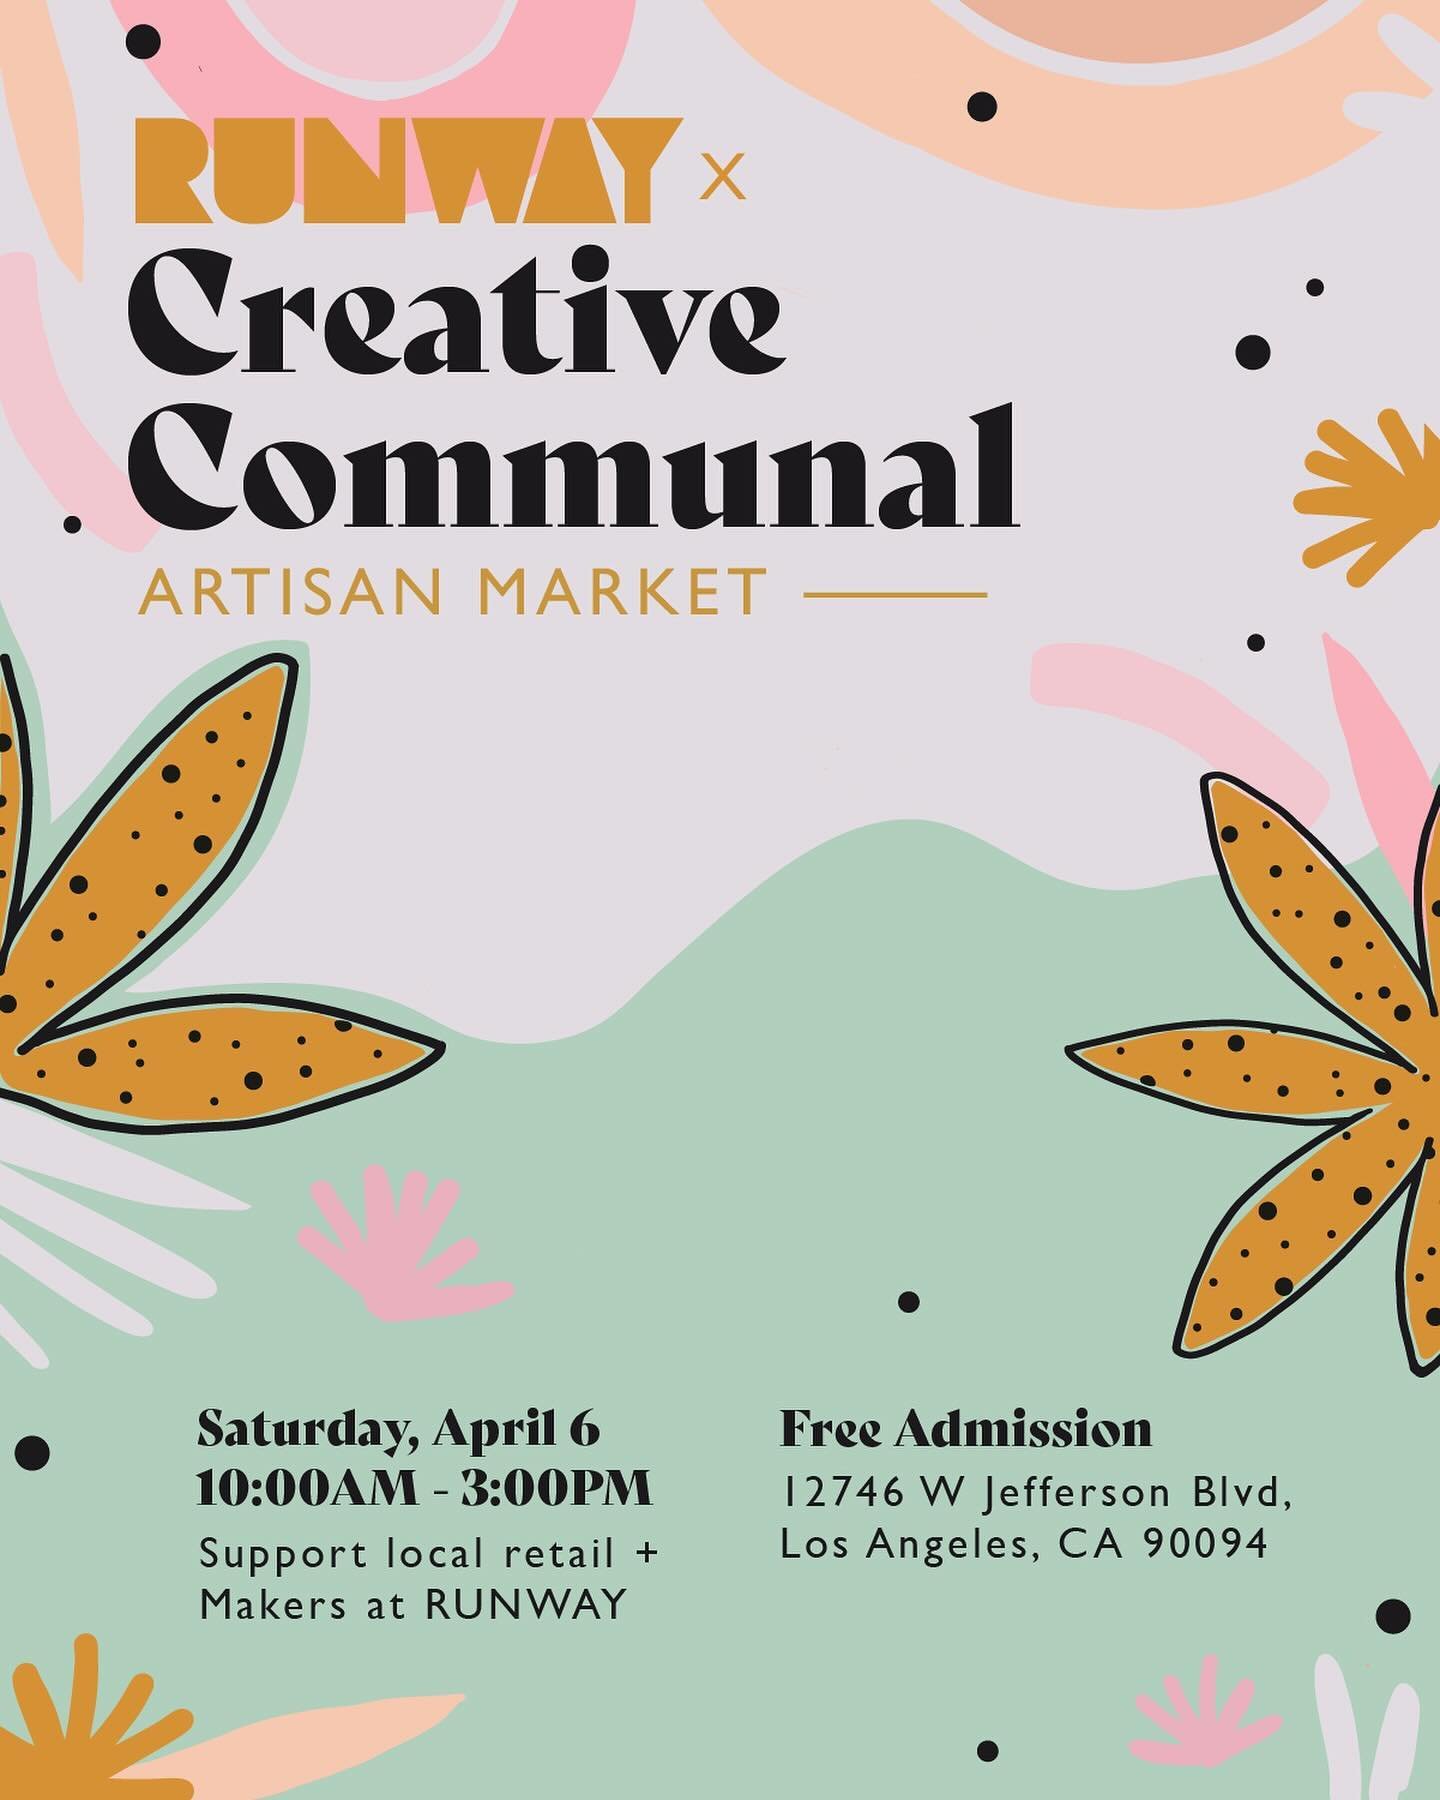 Playa Vista - mark those calendars!! Can't wait to be back at @runwayplayavista this Saturday!! We've got an incredible line up of local artisans +  Spring Fun 🌺